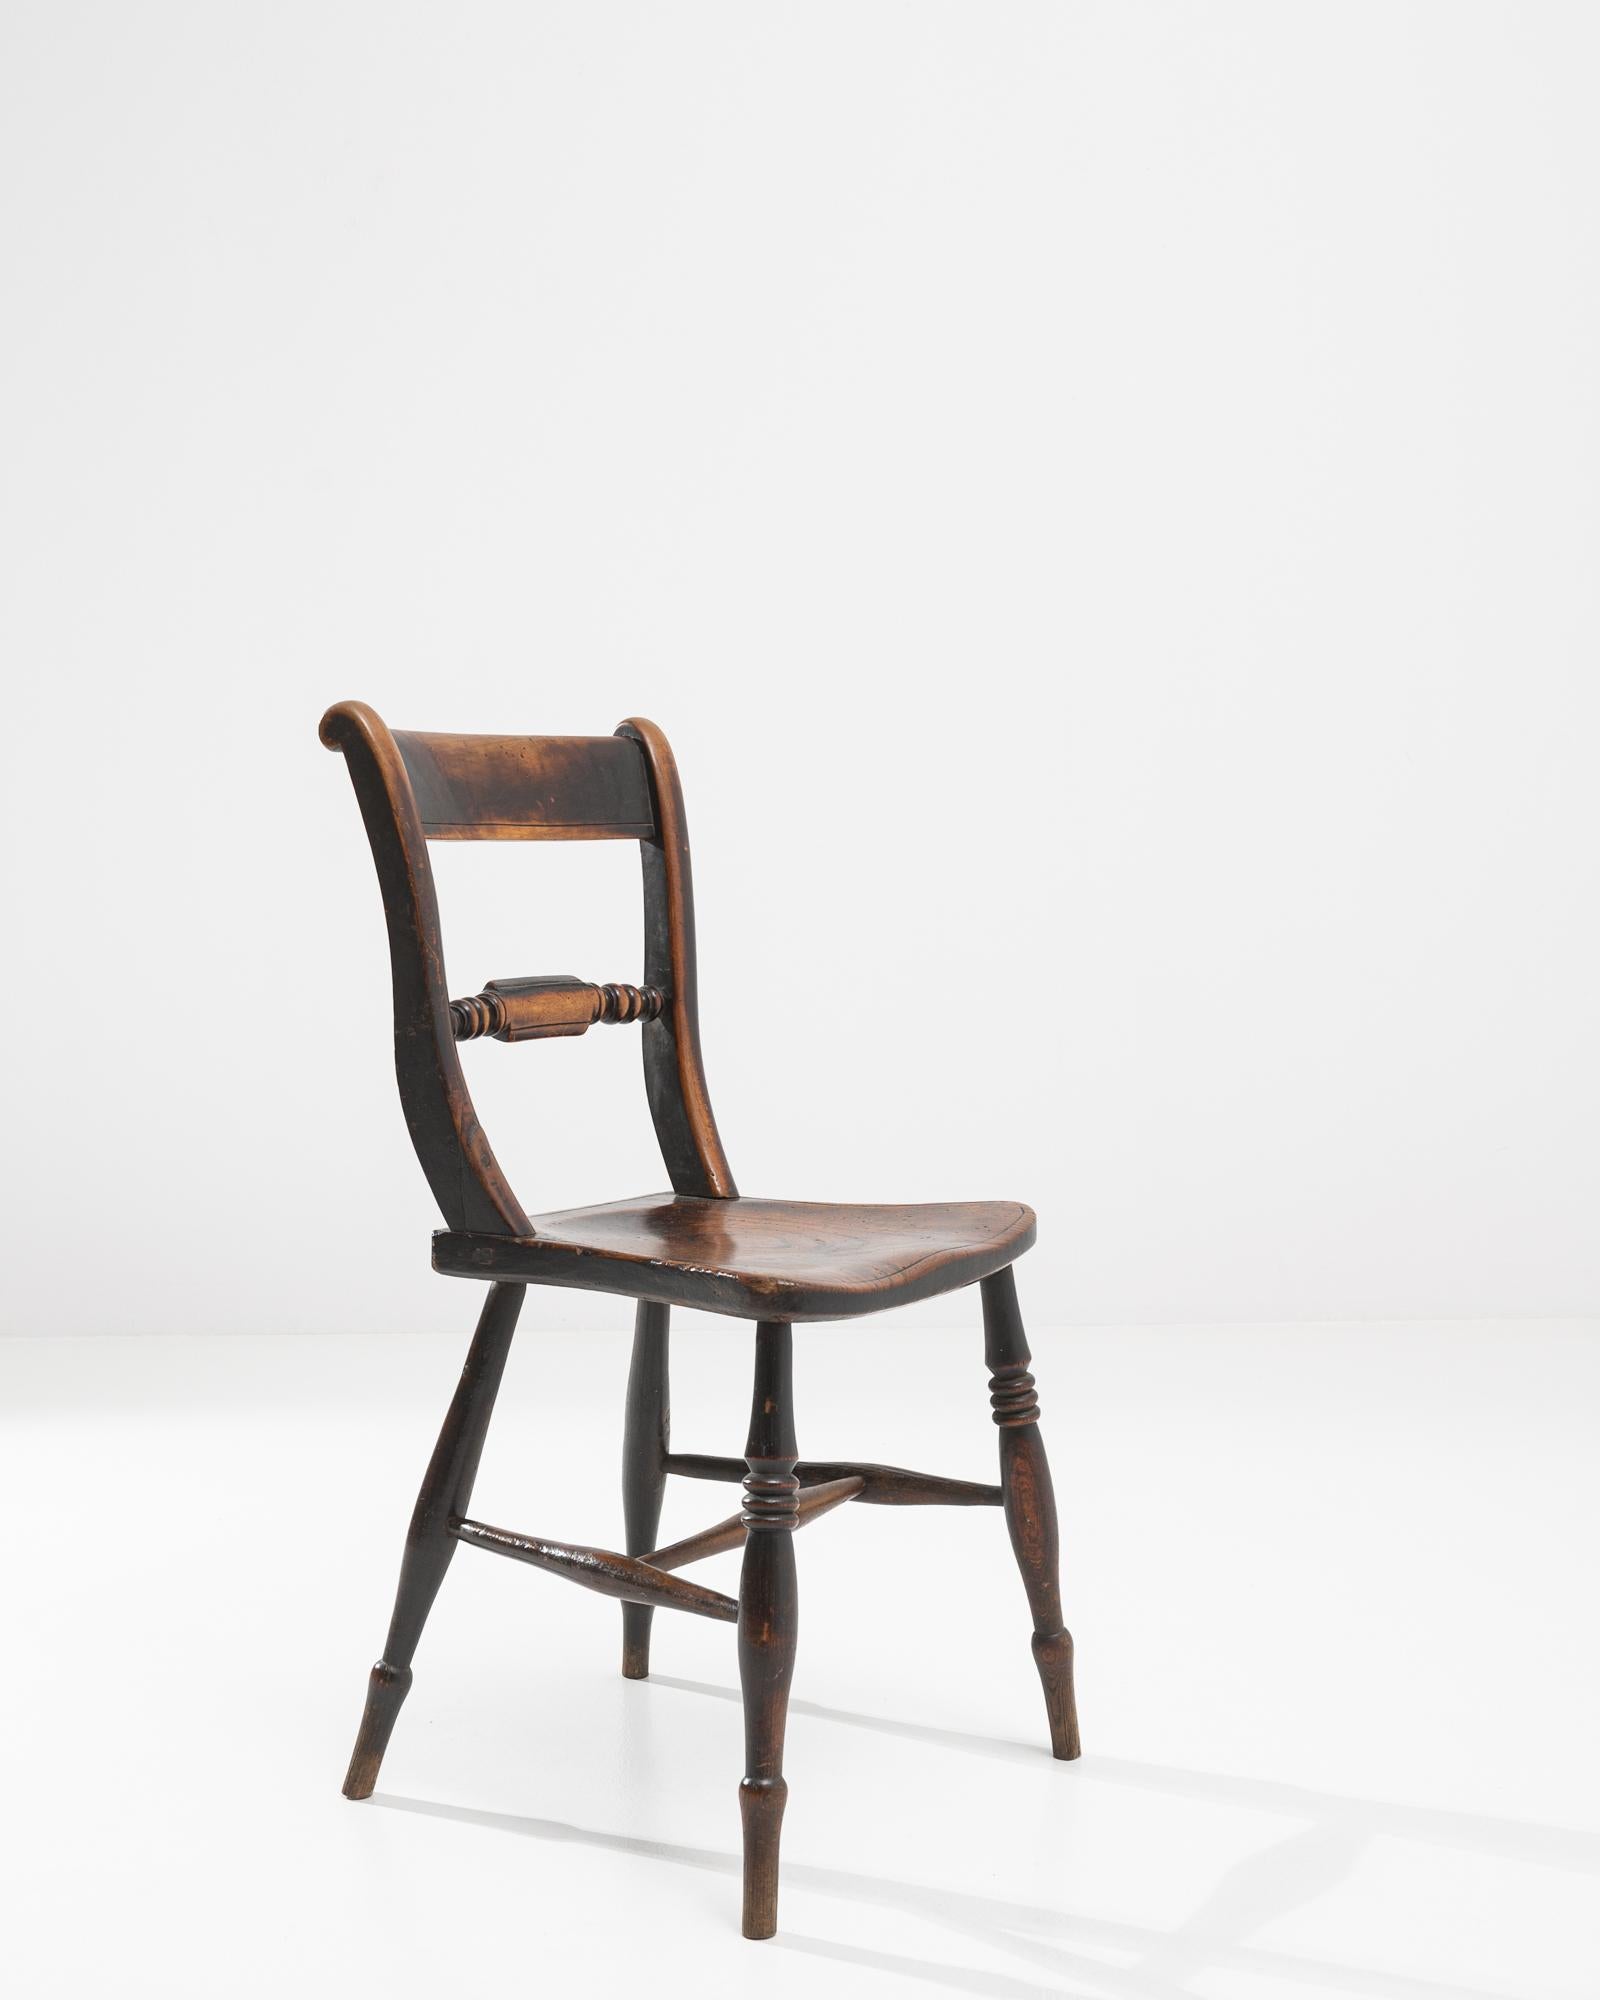 This 19th Century French Wooden Chair epitomizes rustic charm and the enduring elegance of French country design. Each curve and spindle speaks of the chair's handcrafted origins, with a lovingly worn patina that only time could bestow. The warmth